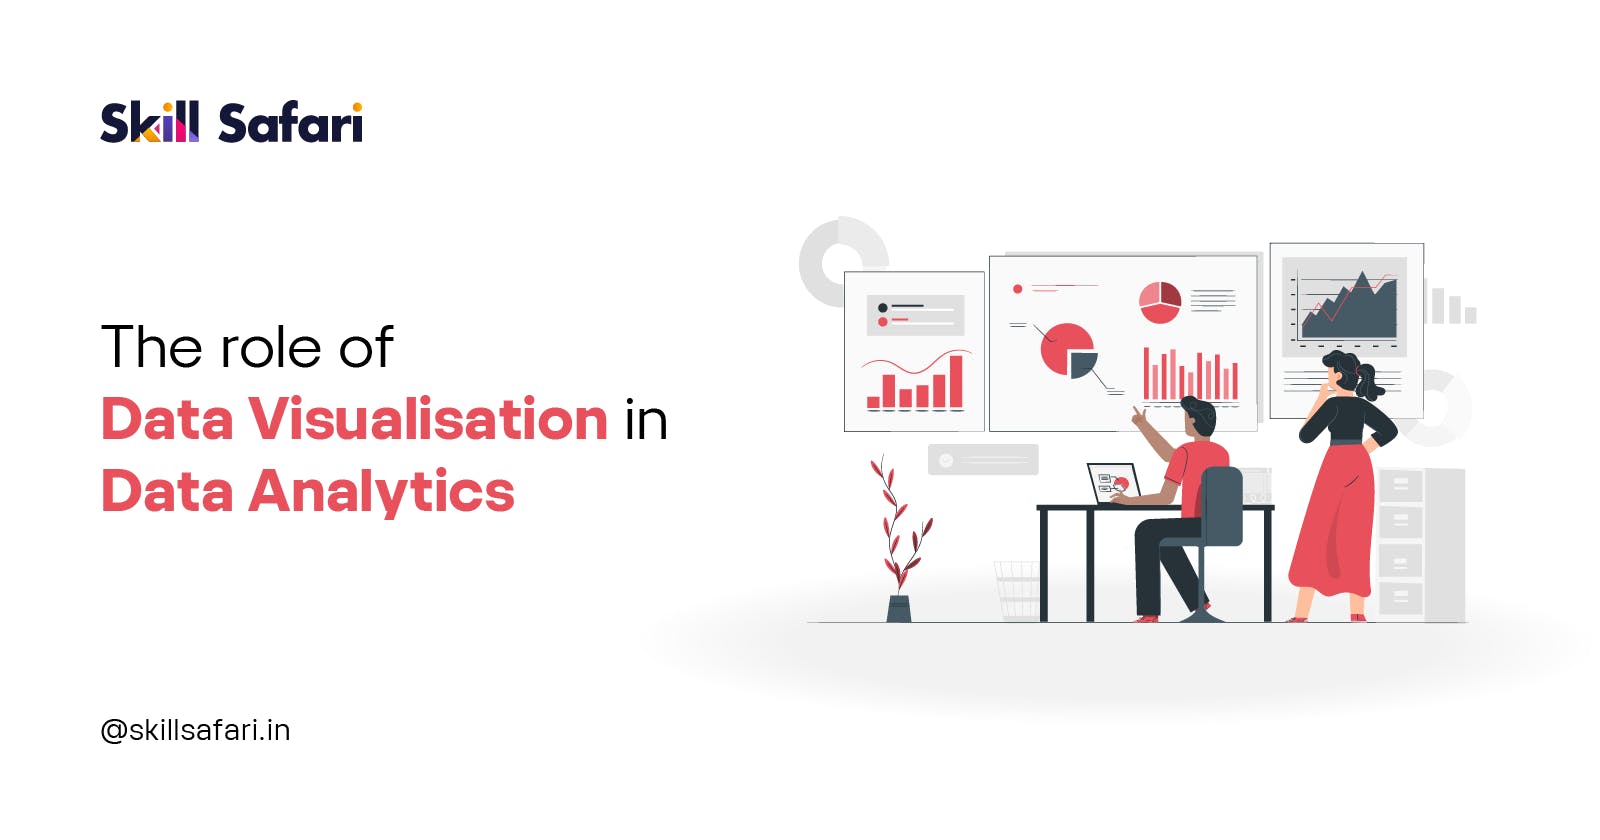 The role of Data Visualisation in Data Analytics